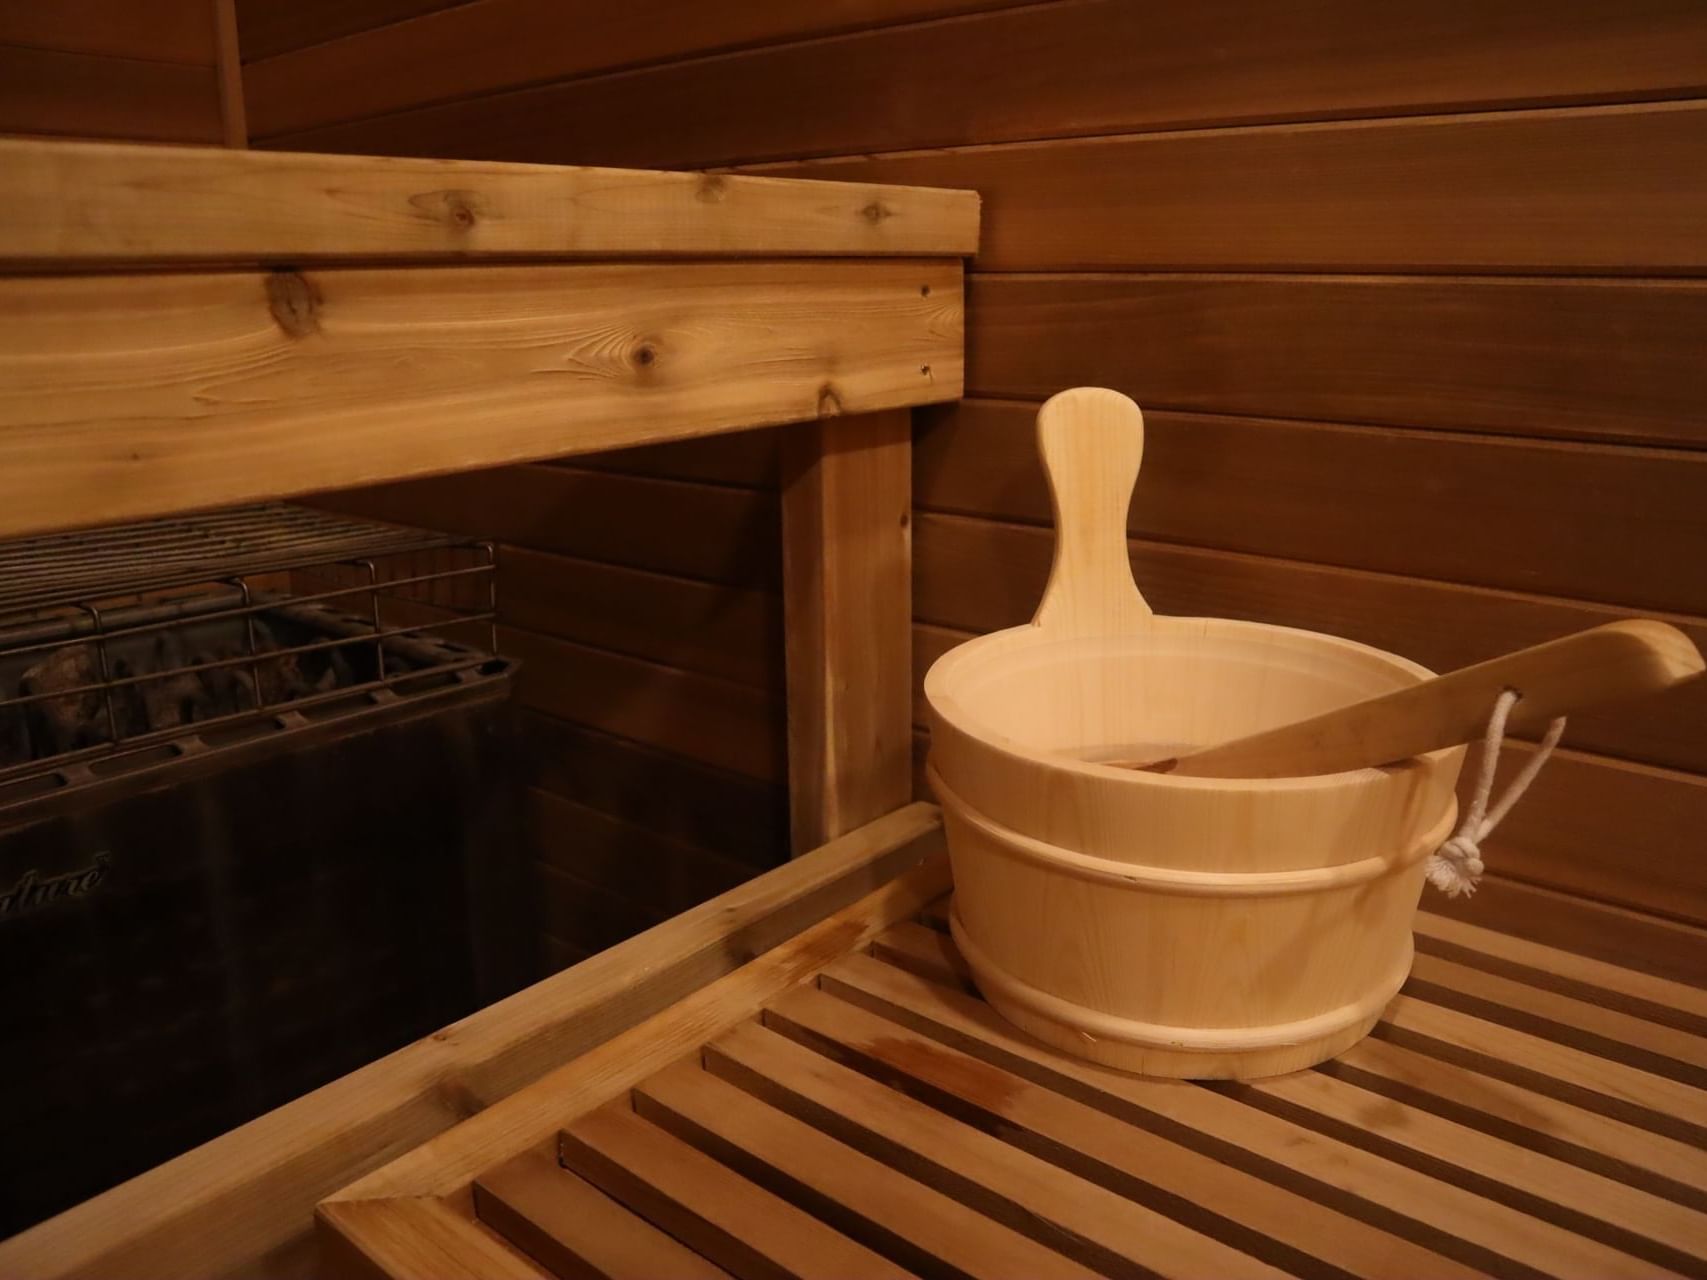 Equipment in the relaxing sauna with dim lights at Alderbrook Resort & Spa